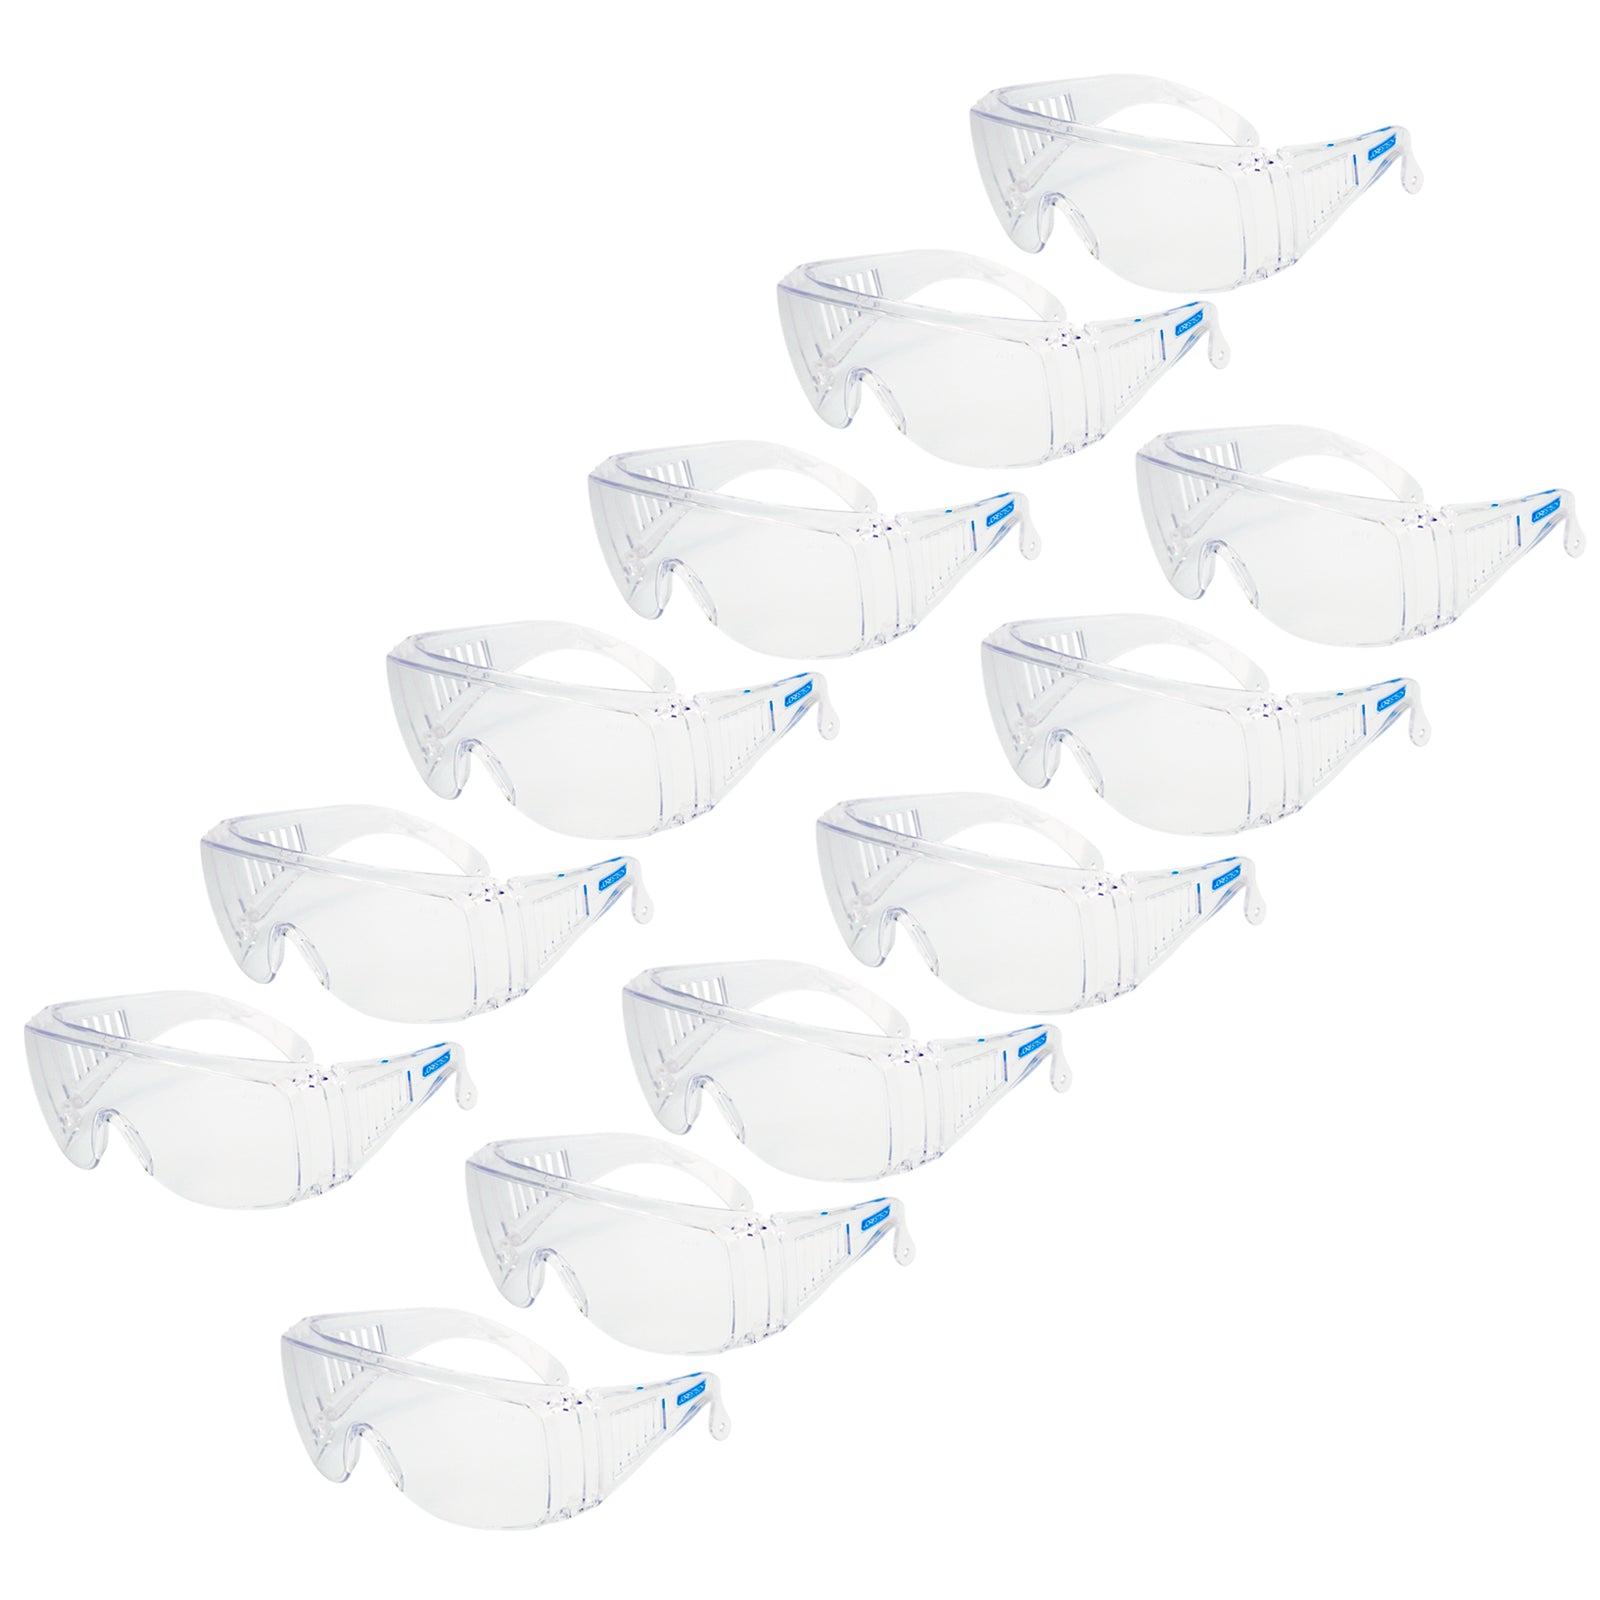 pack of 12 clear Jorestech safety glasses for high impact protection